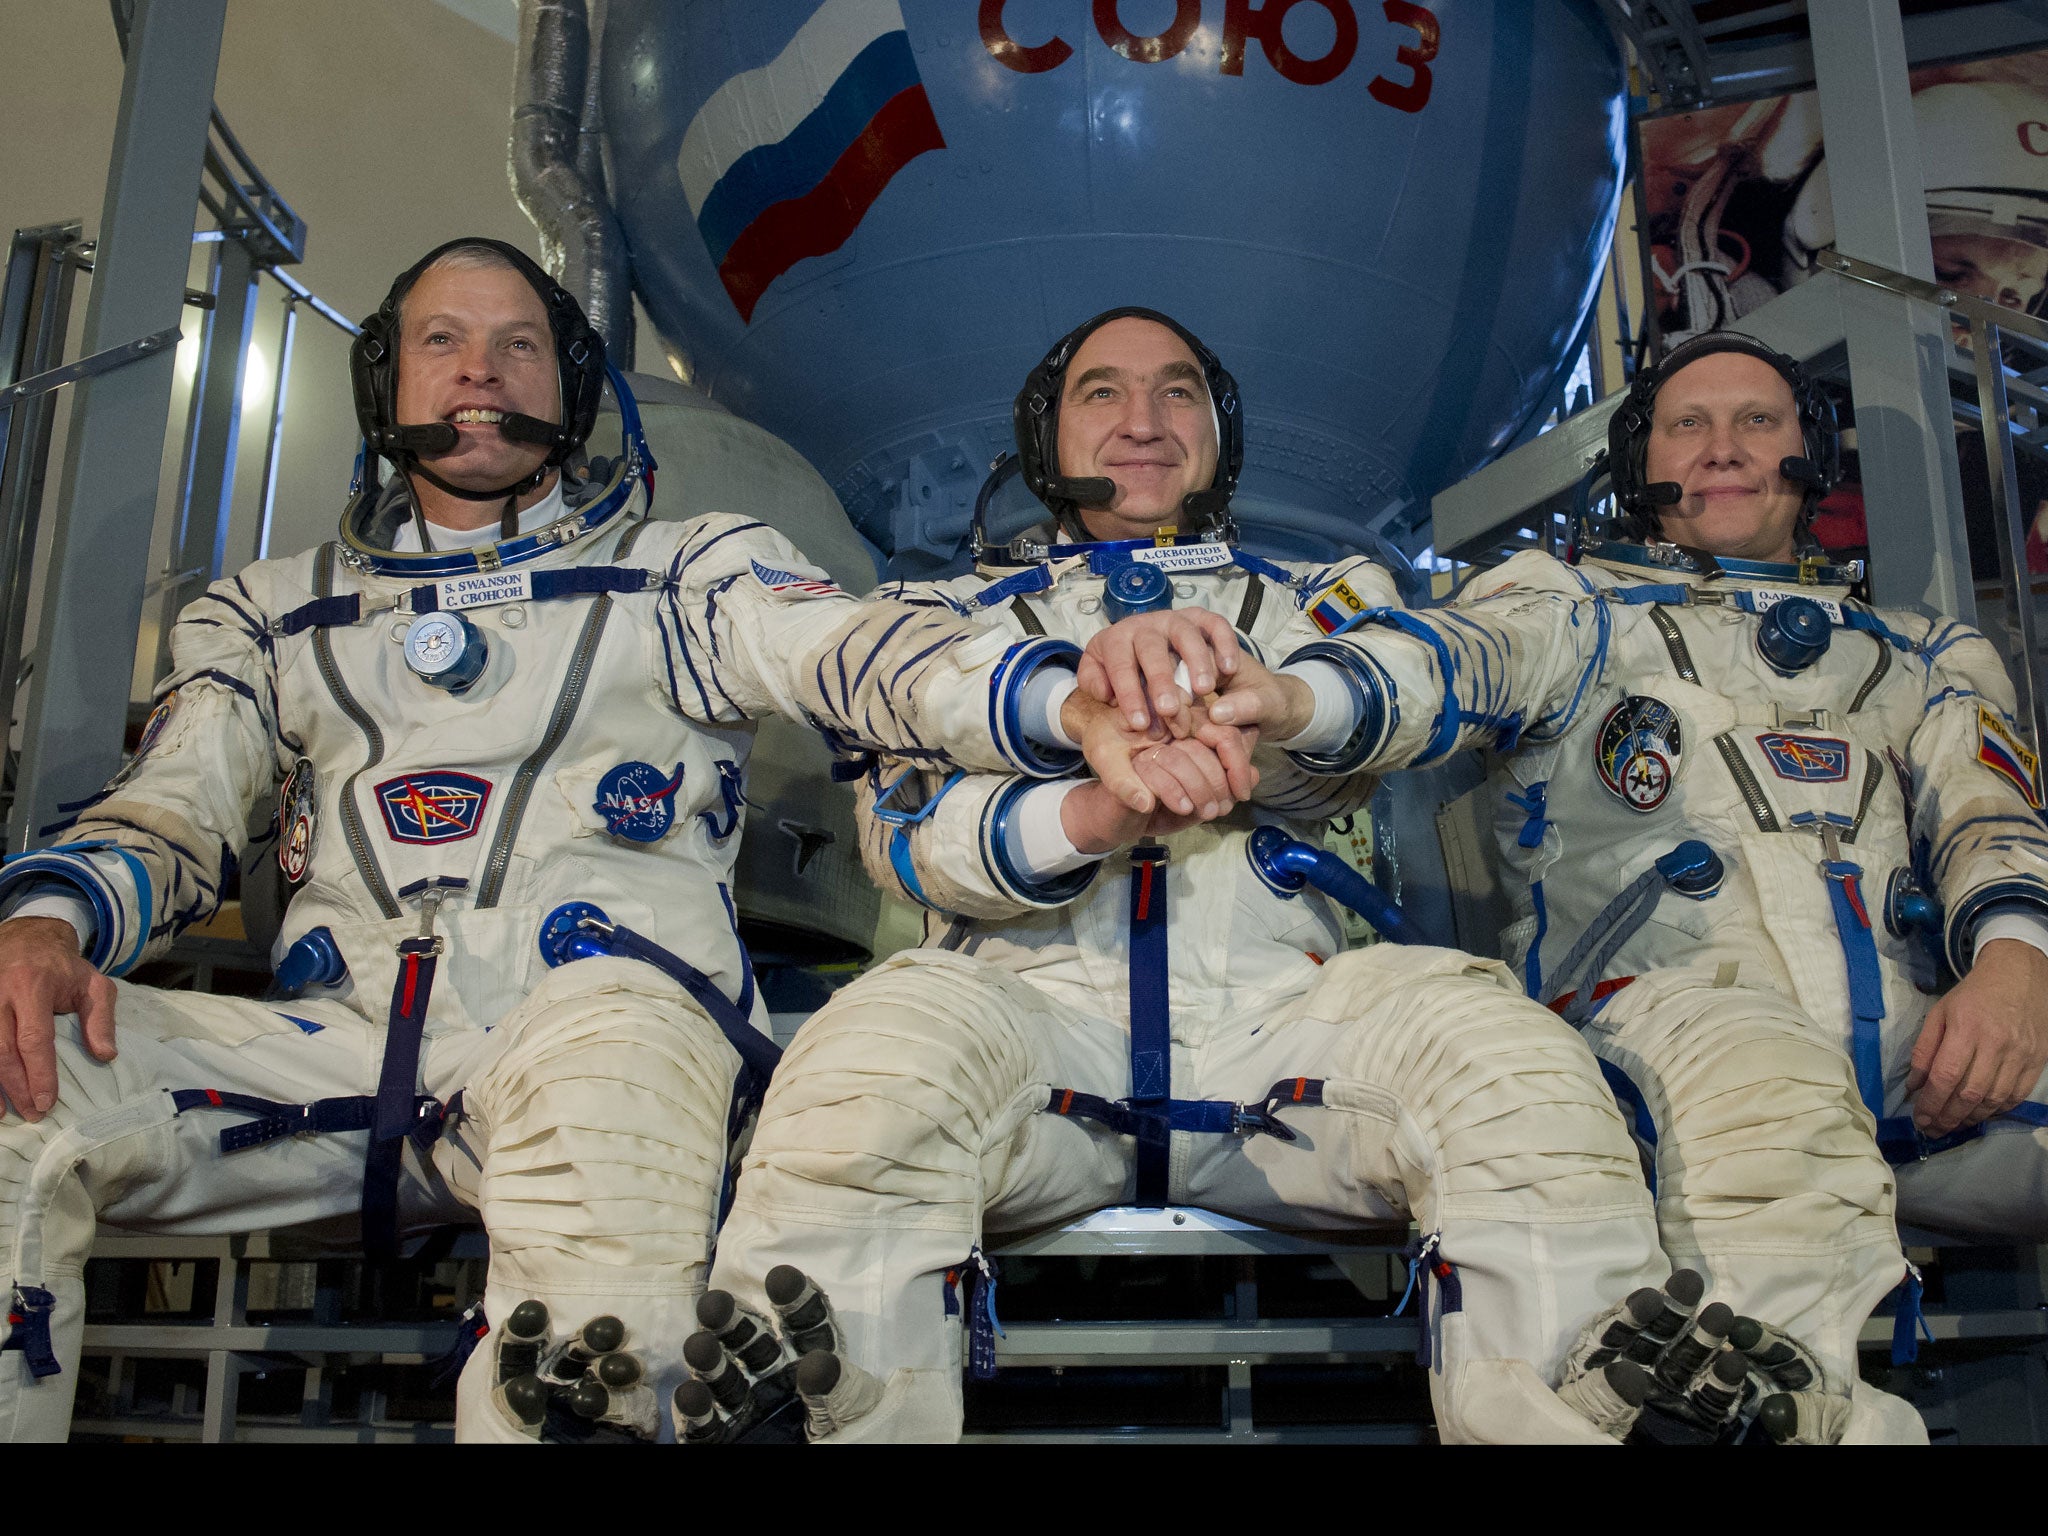 US NASA astronaut Steven Swanson (L) joins hands with Russian cosmonauts, Alexander Skvortsov (C) and Oleg Artemyev (R), in front of a mock-up of a Soyuz TMA spacecraft before their final preflight exam at the Gagarin Cosmonauts' Training Centre in Star C